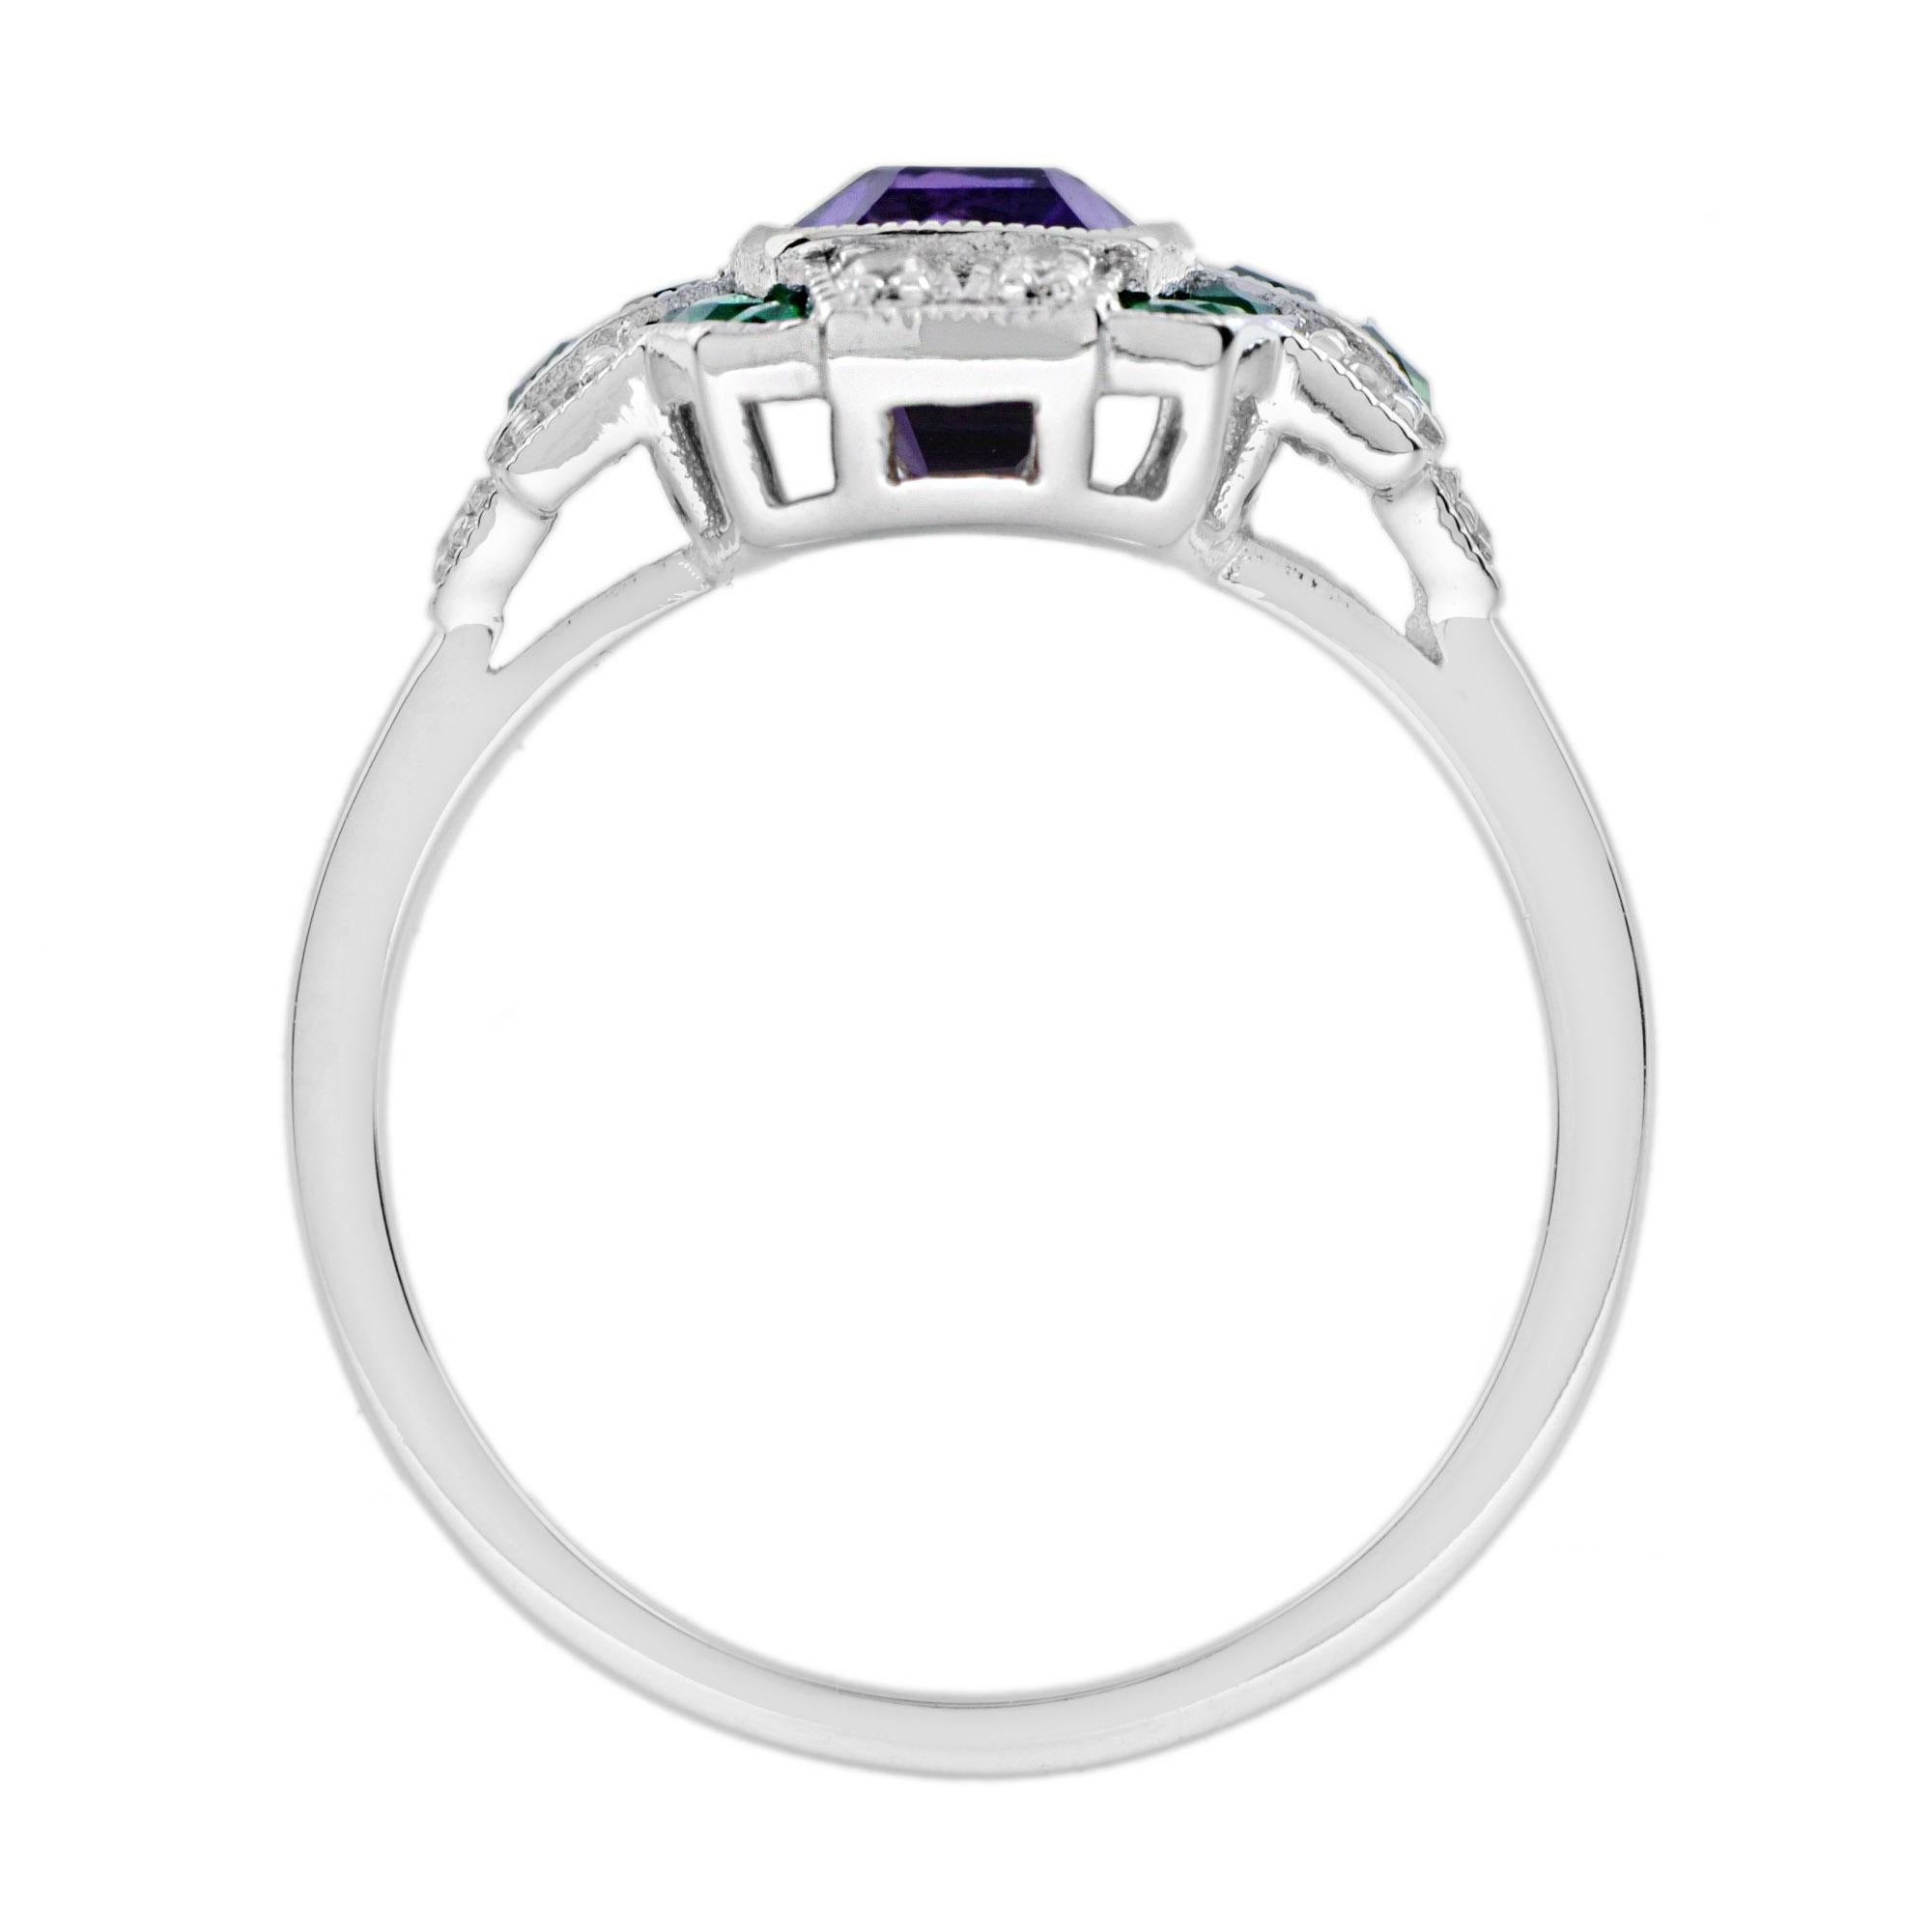 Amethyst Emerald Diamond Art Deco Style Ring in 14K White Gold For Sale 1